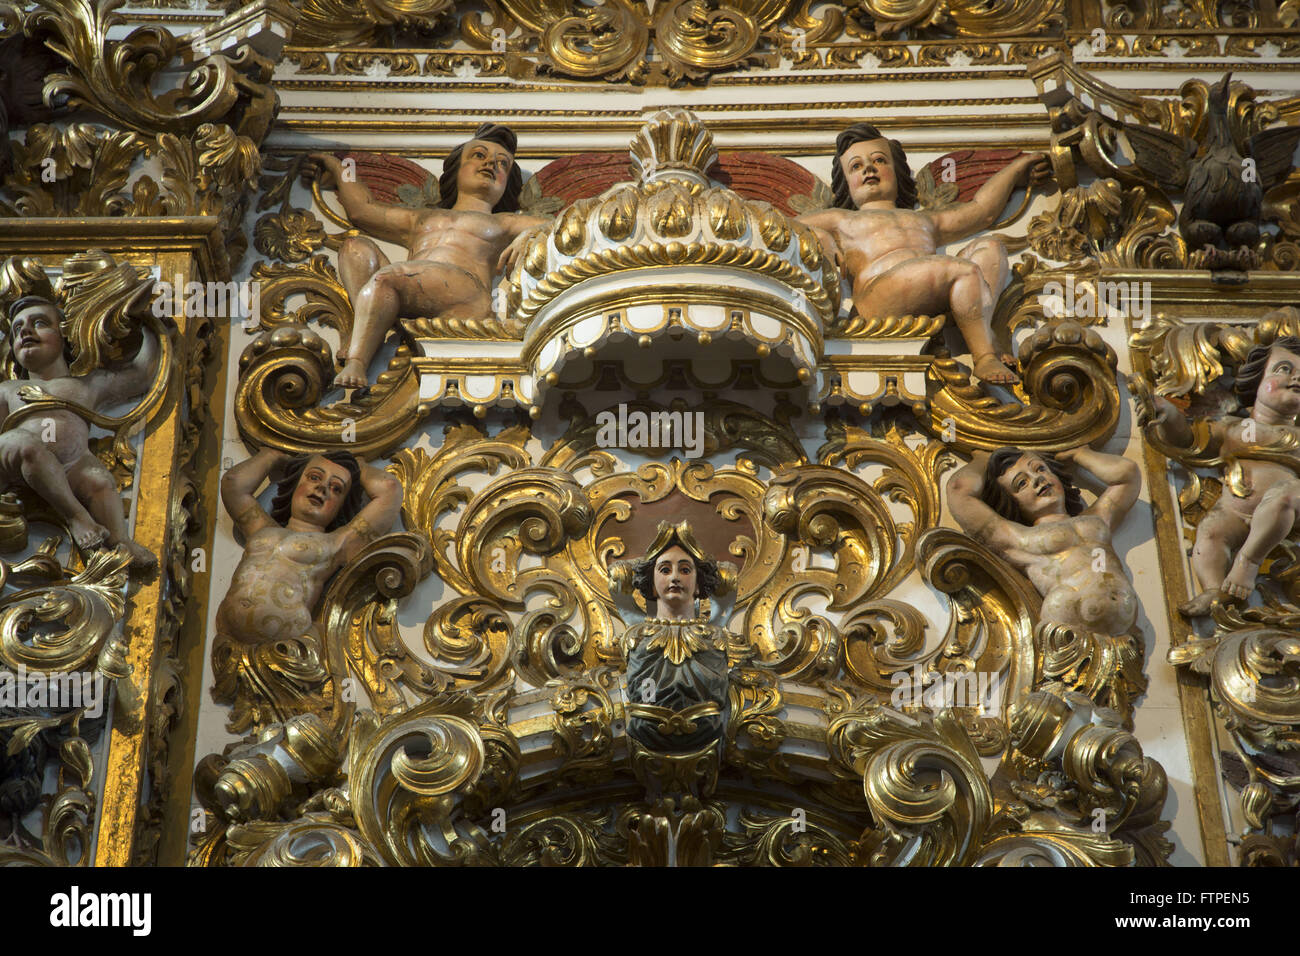 Detail of the interior of the Church of Sao Francisco carved gold and polychrome sculptures Stock Photo